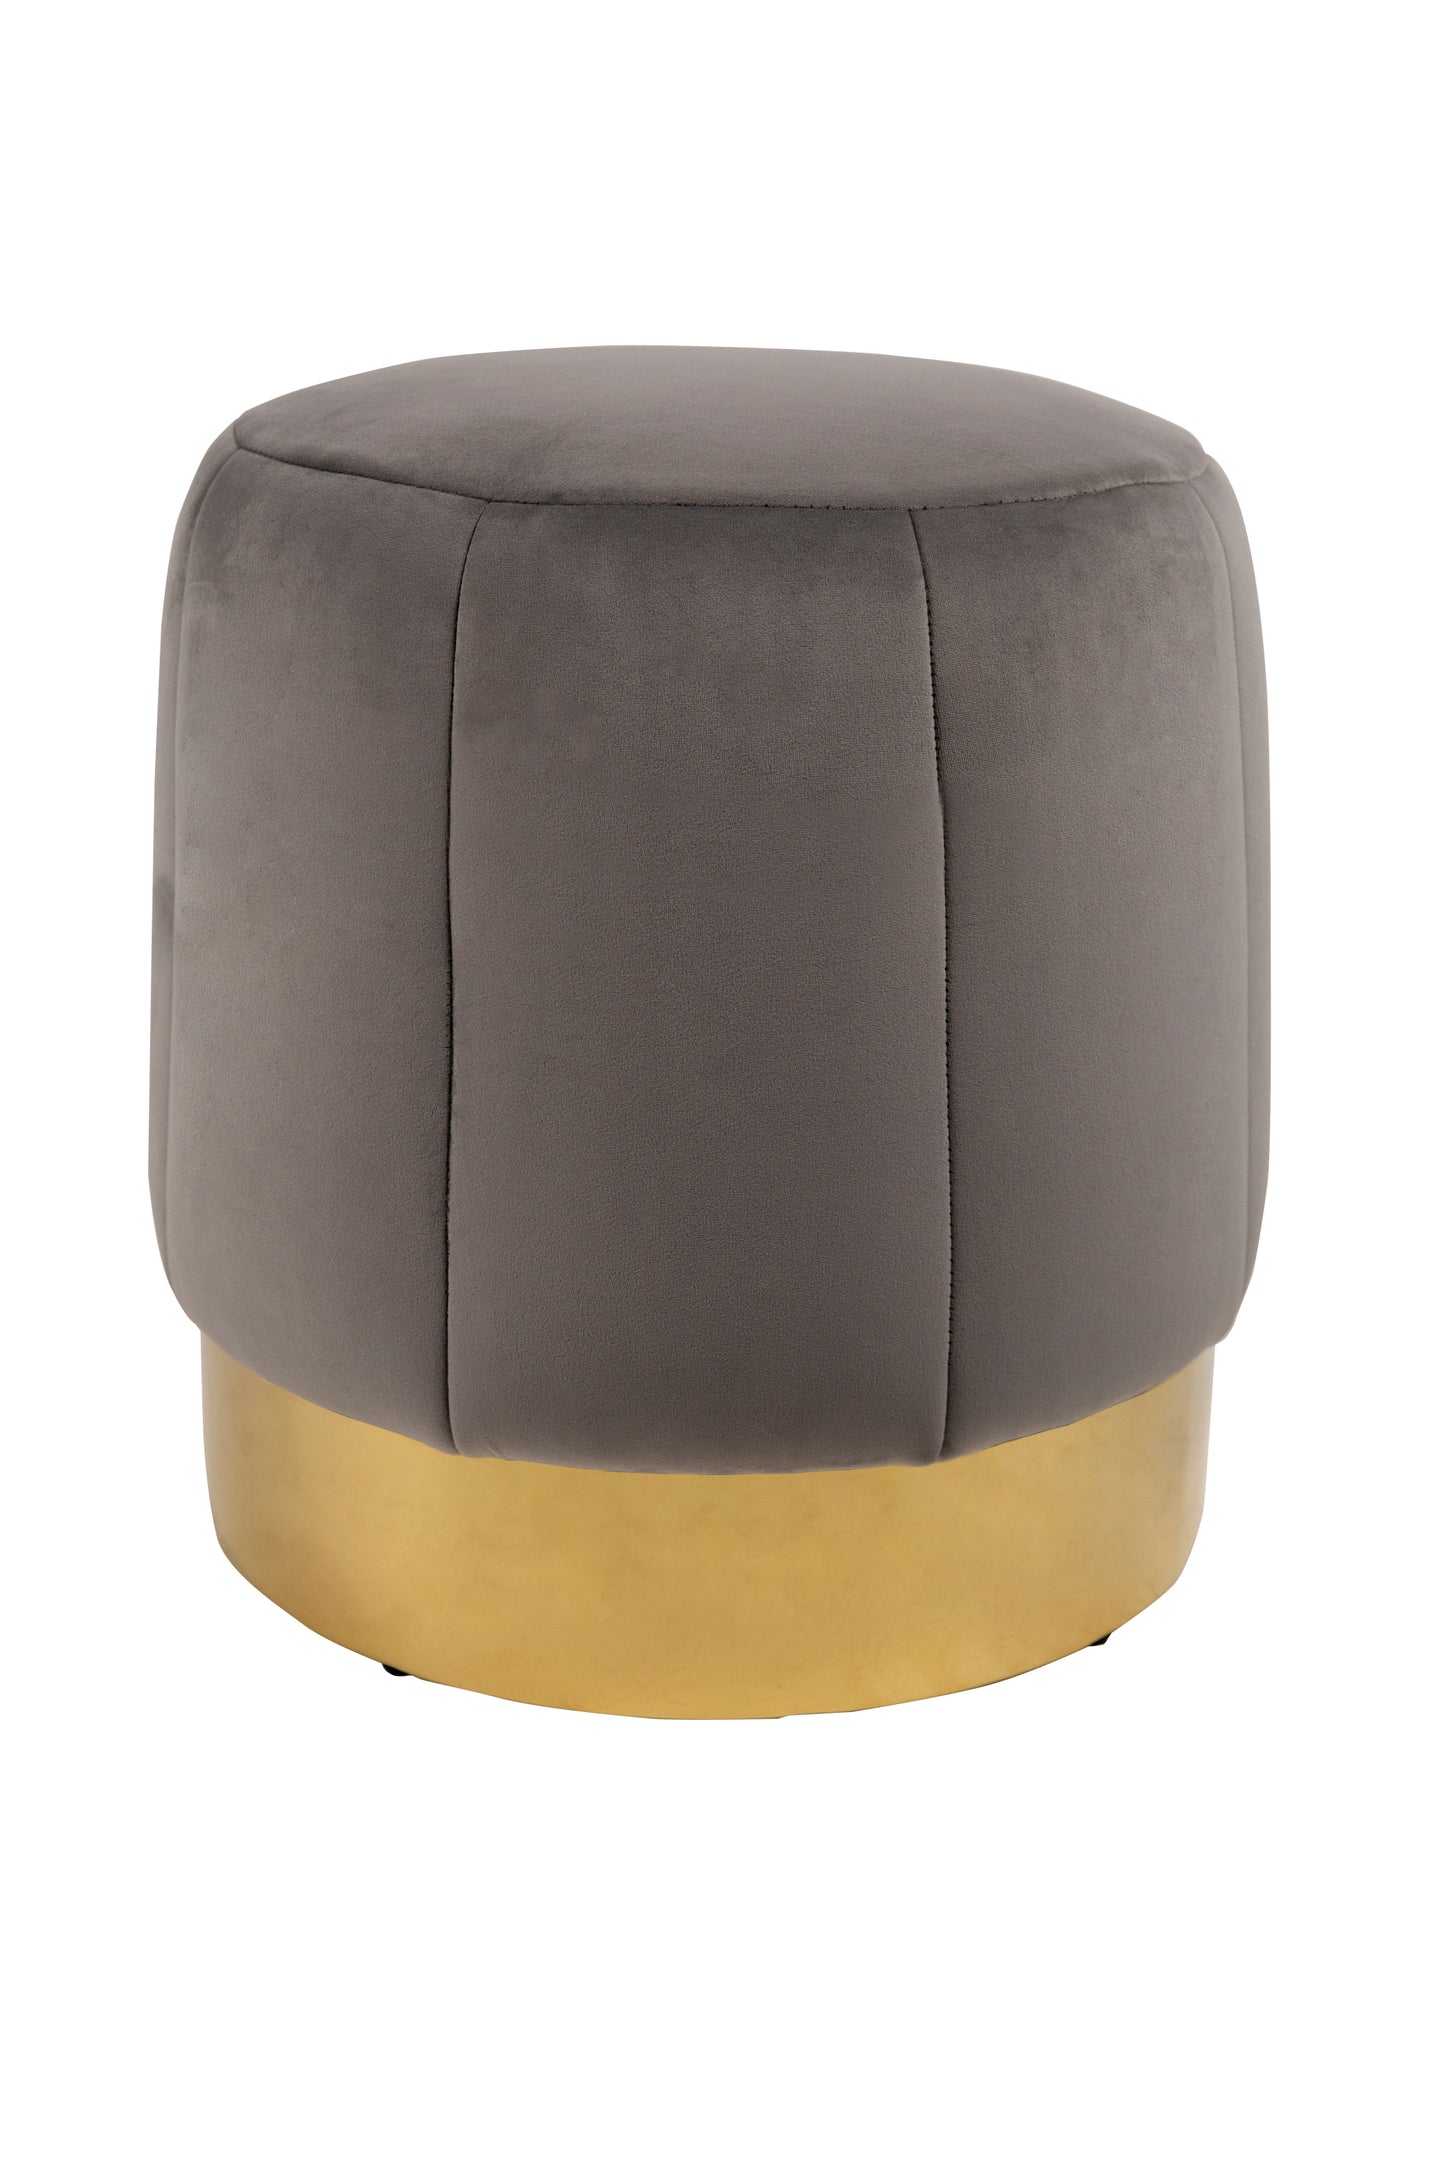 Tall Stainless Steel Ottoman in Gray